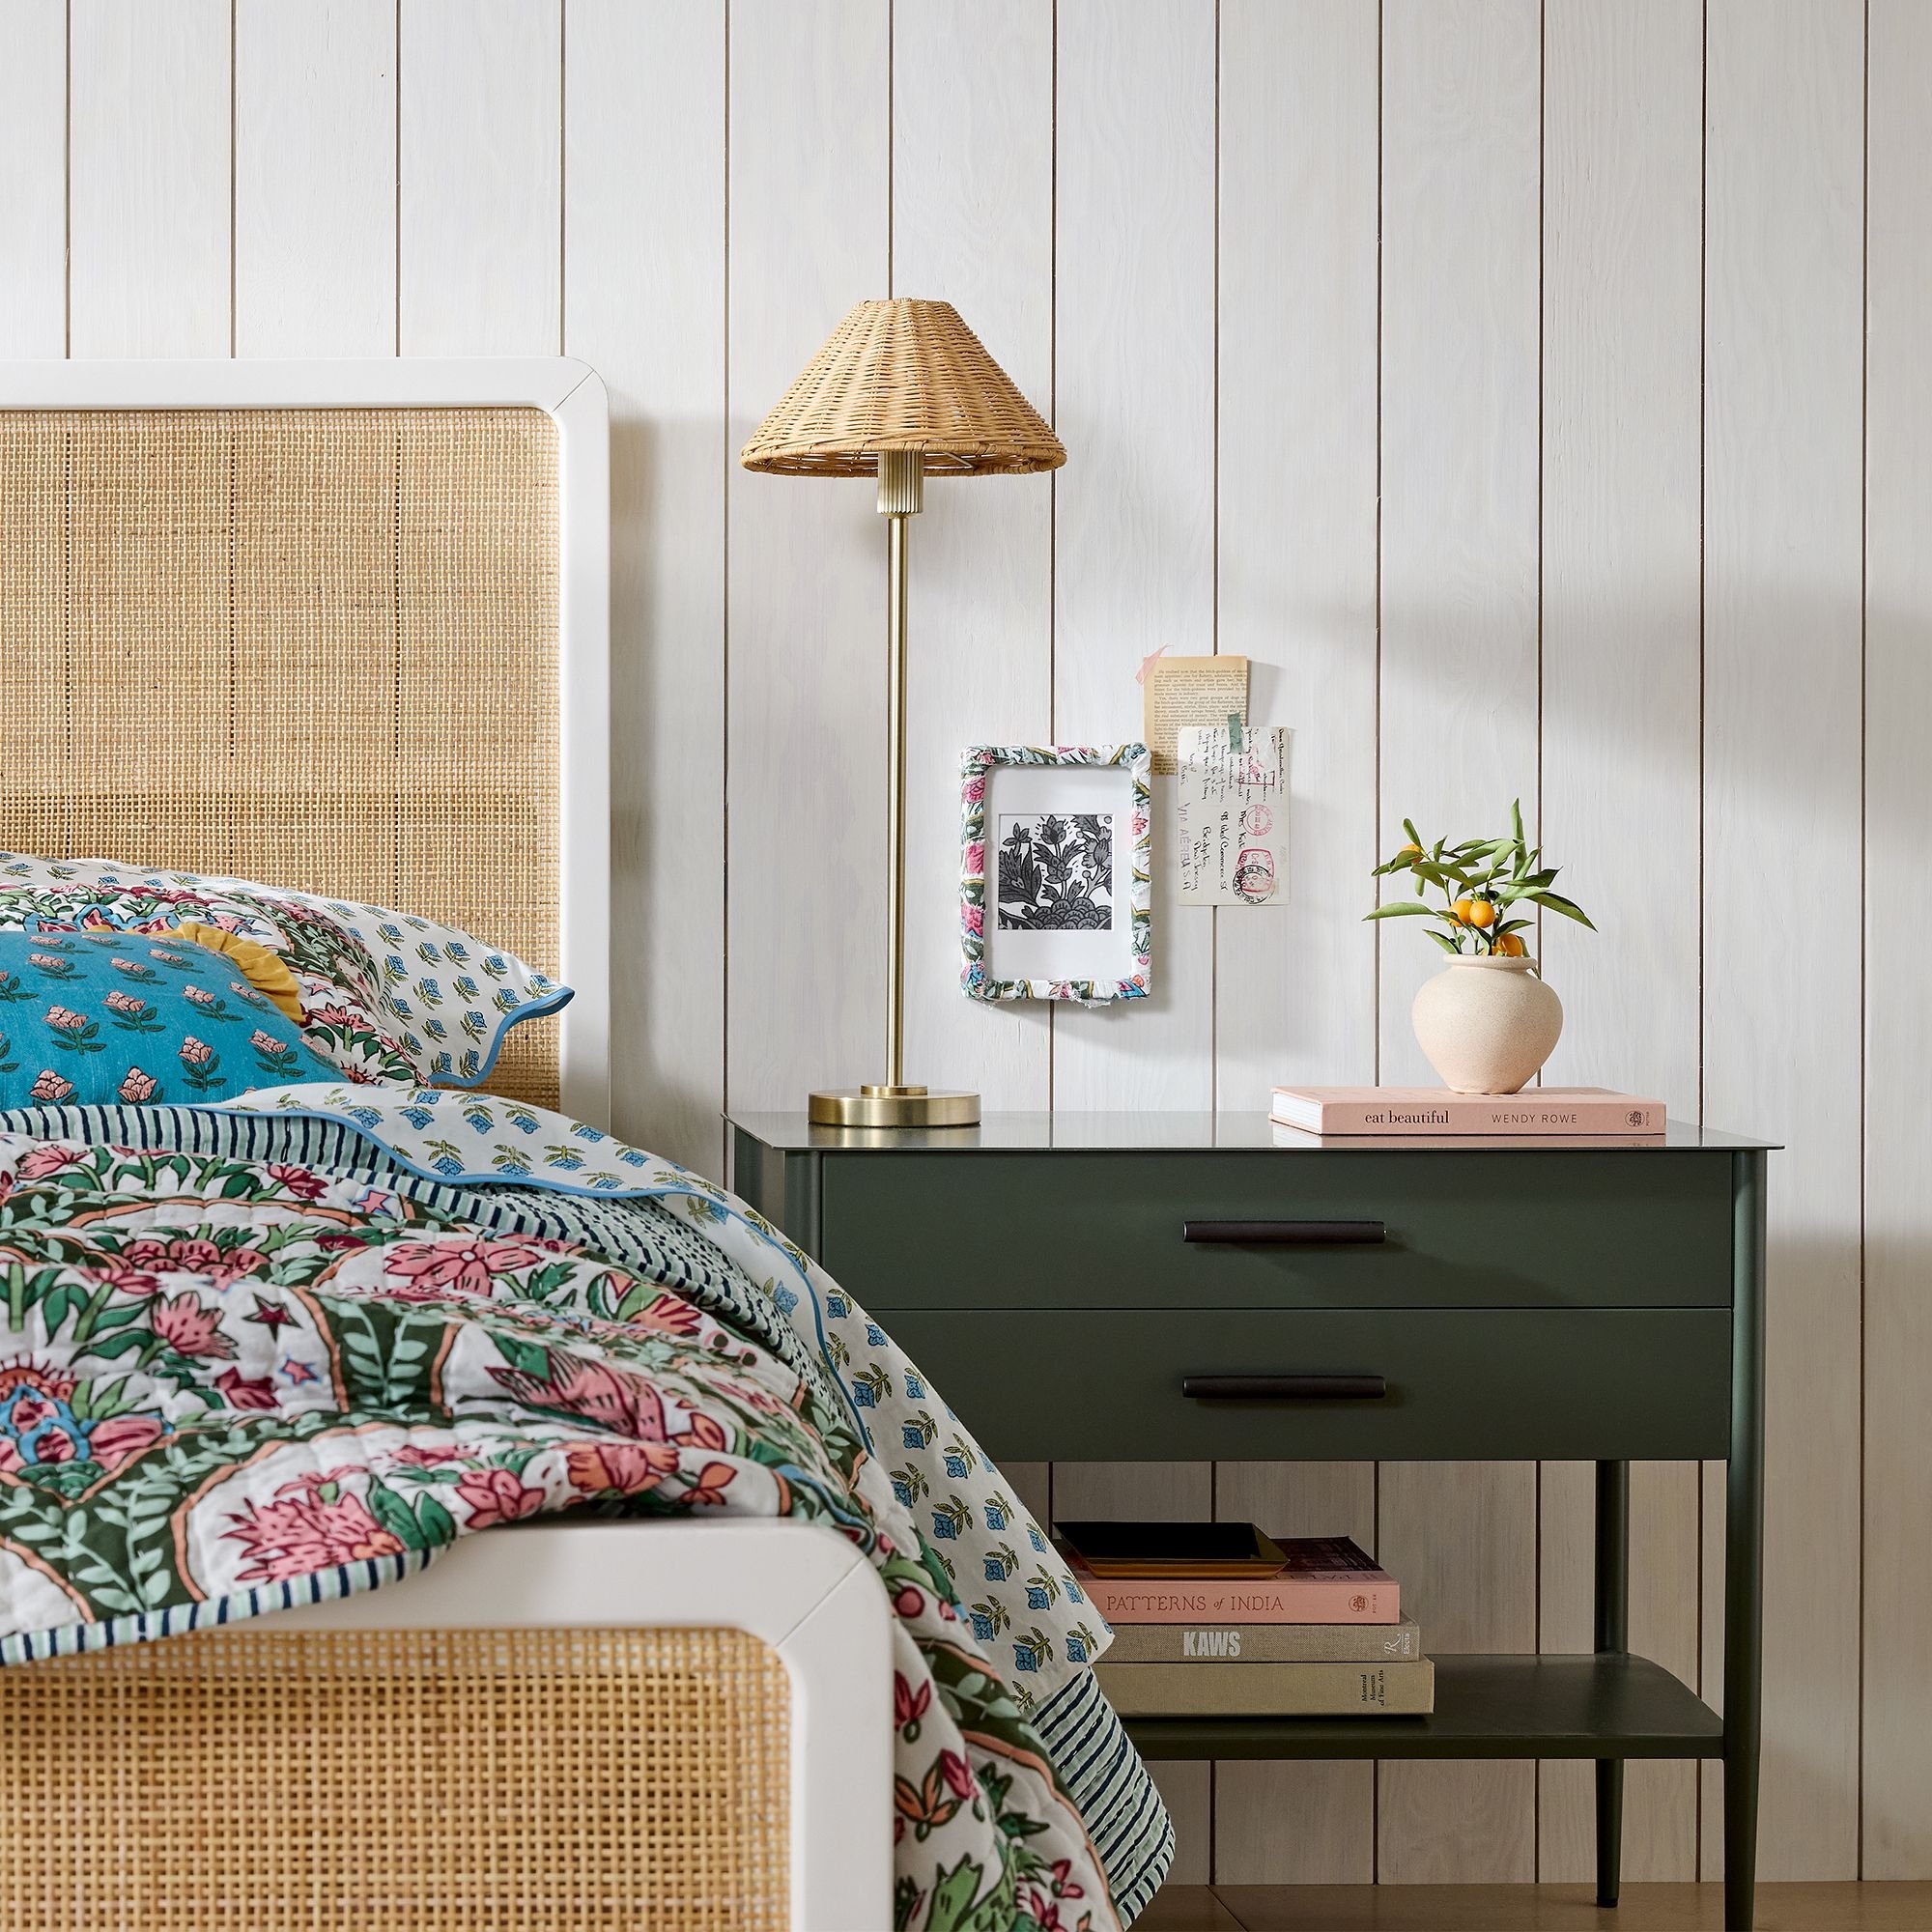 Here's Why You Should Consider a Desk as a Nightstand in Your Bedroom